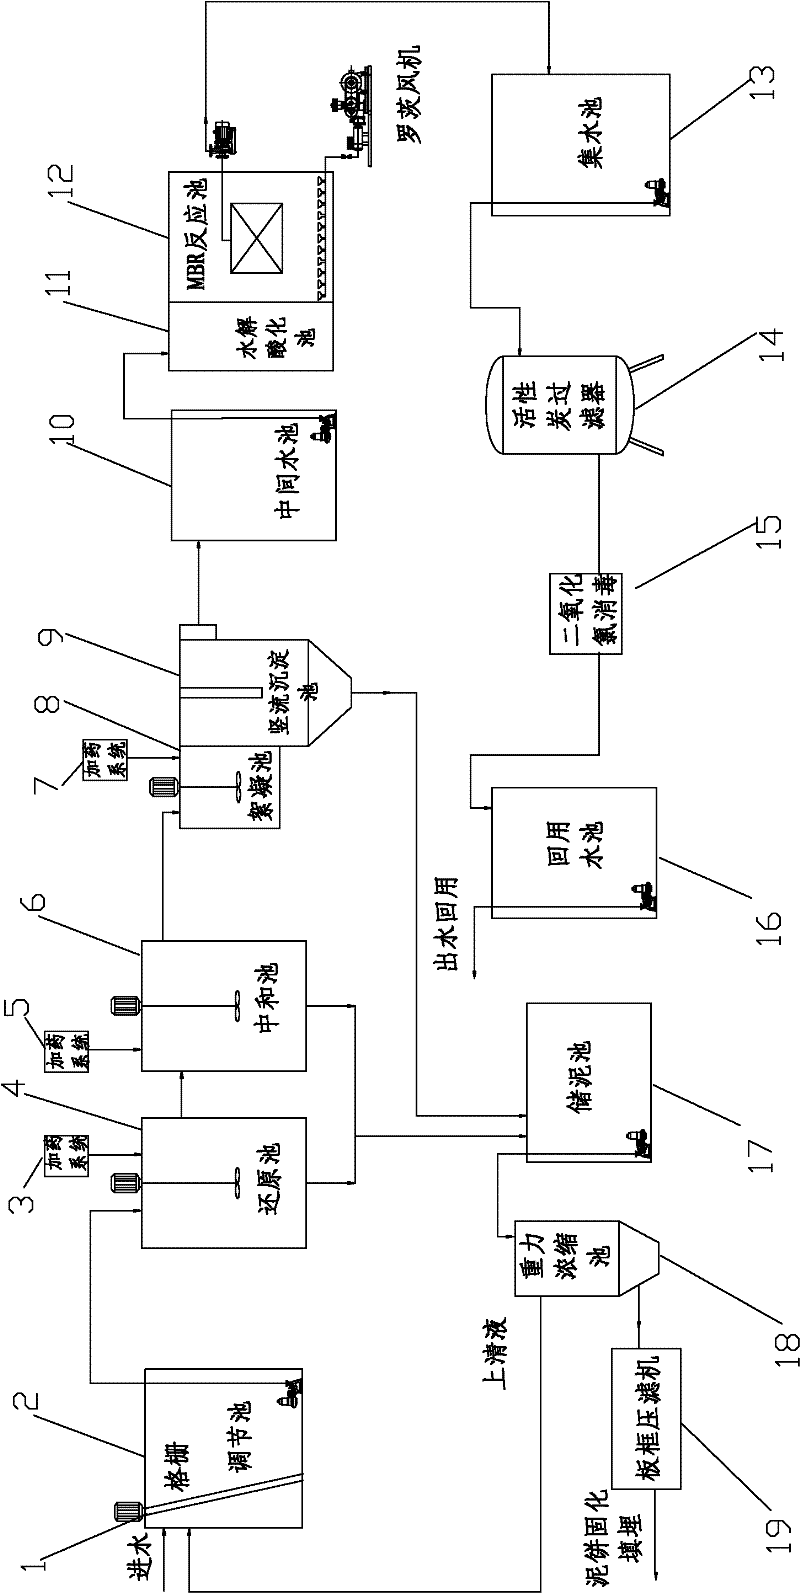 Hazardous waste handling center waste water integrated treatment system and method